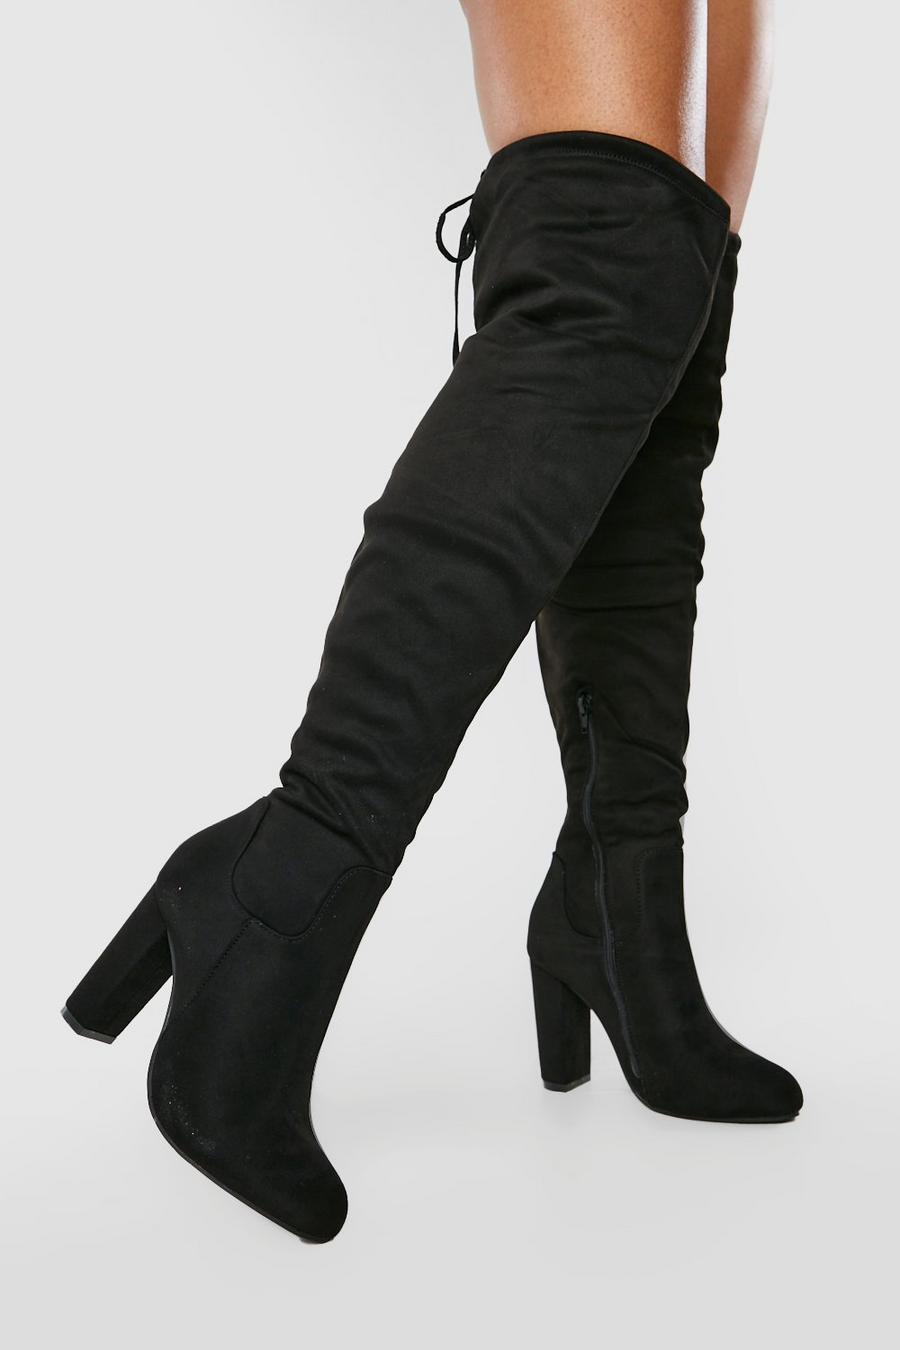 Black Over The Knee Tie Back Padded Boots image number 1